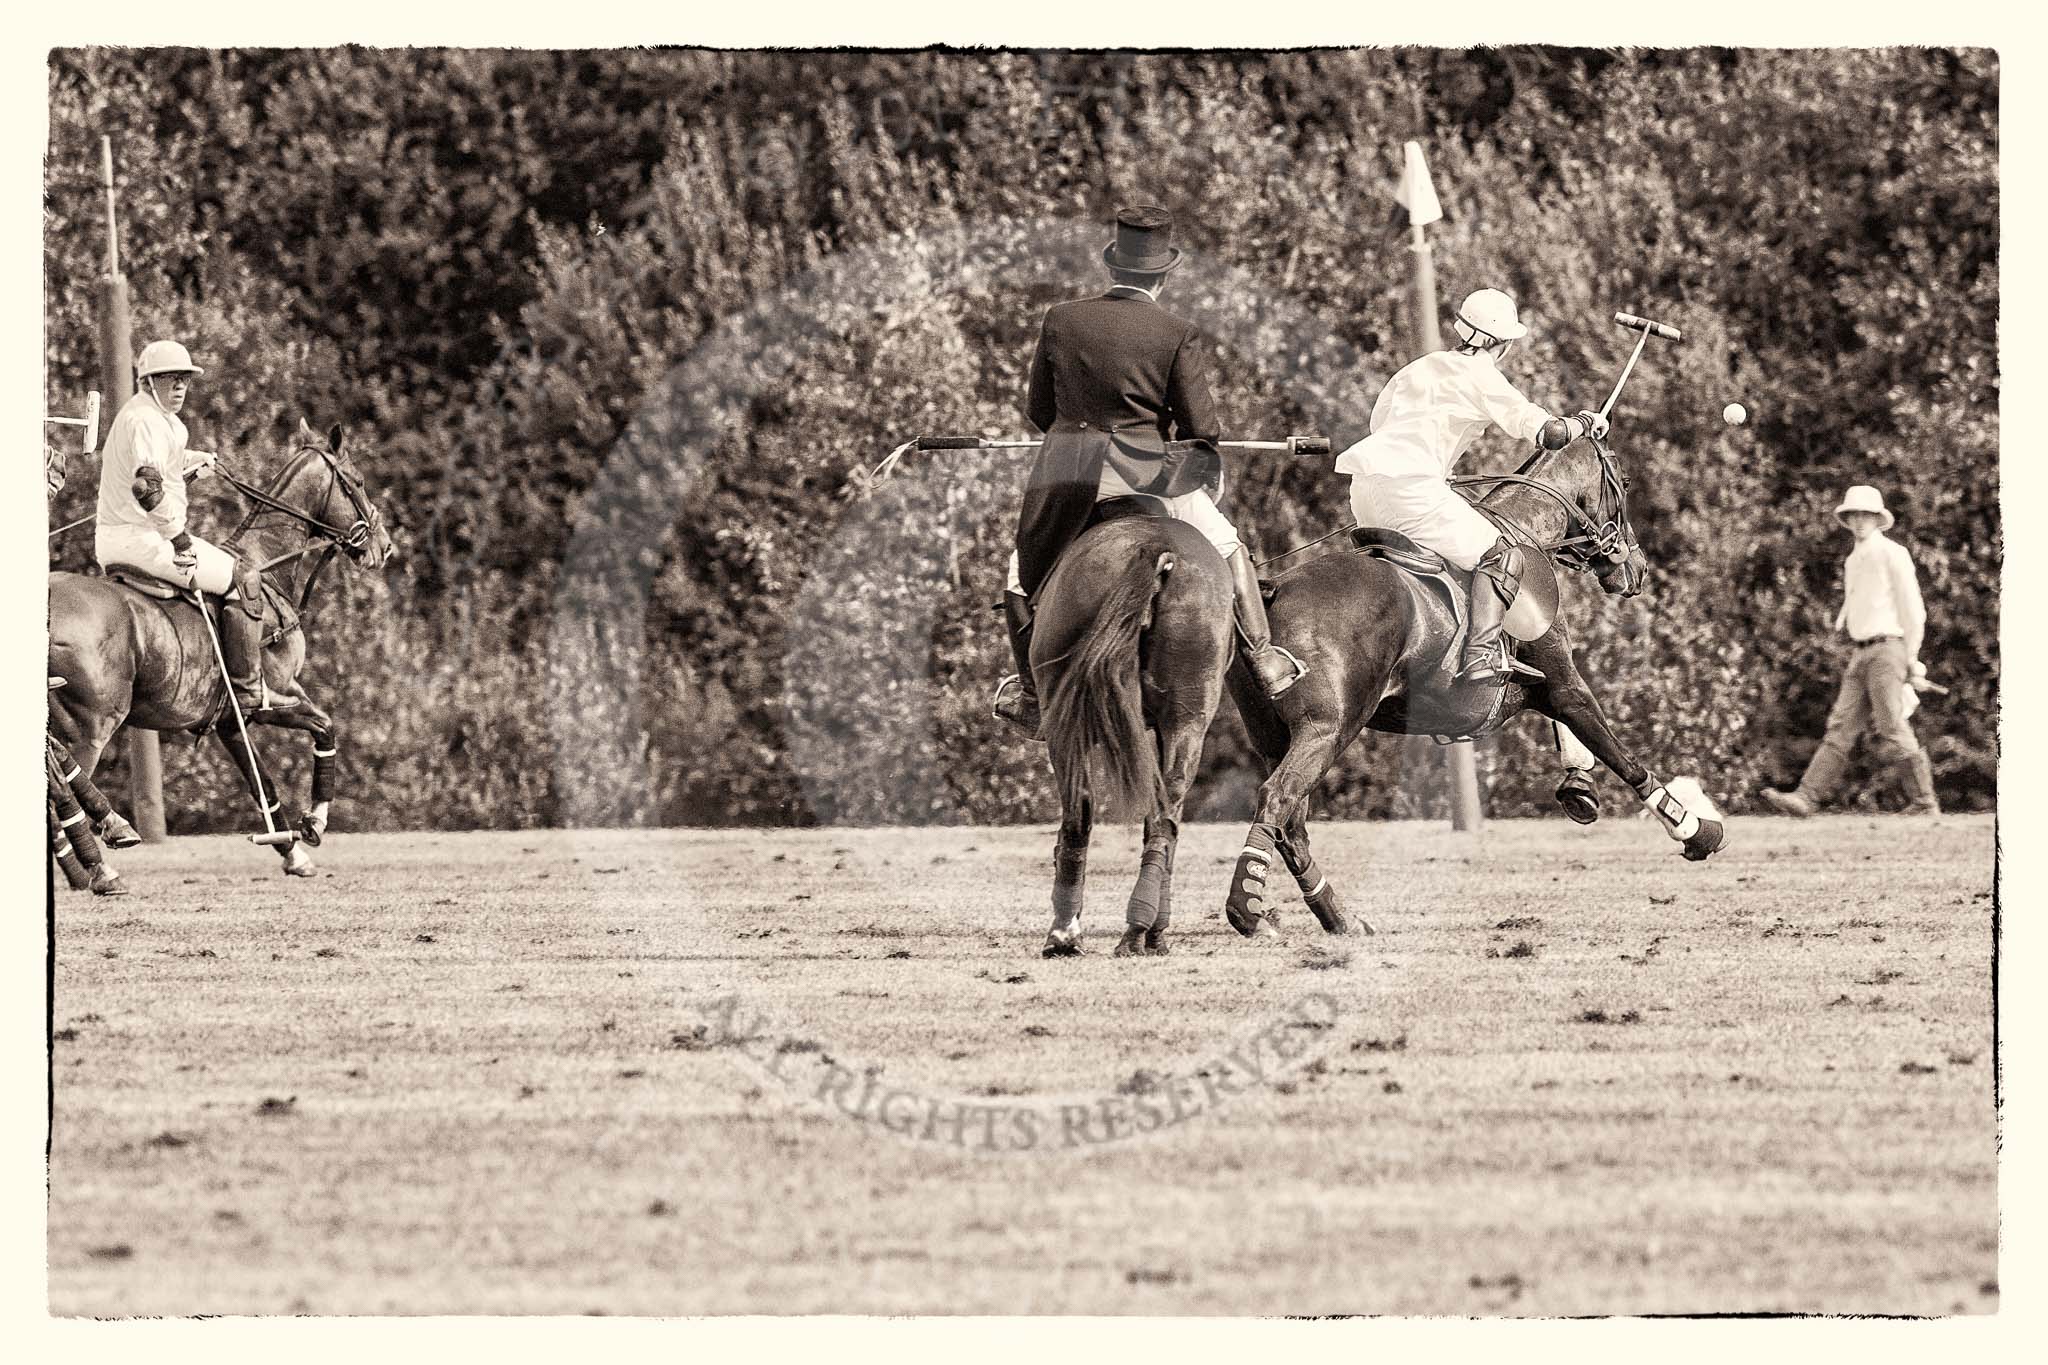 7th Heritage Polo Cup semi-finals: La Golondrina Argentina Pepe Riglos (6) ARG going towards goal..
Hurtwood Park Polo Club,
Ewhurst Green,
Surrey,
United Kingdom,
on 04 August 2012 at 16:16, image #323